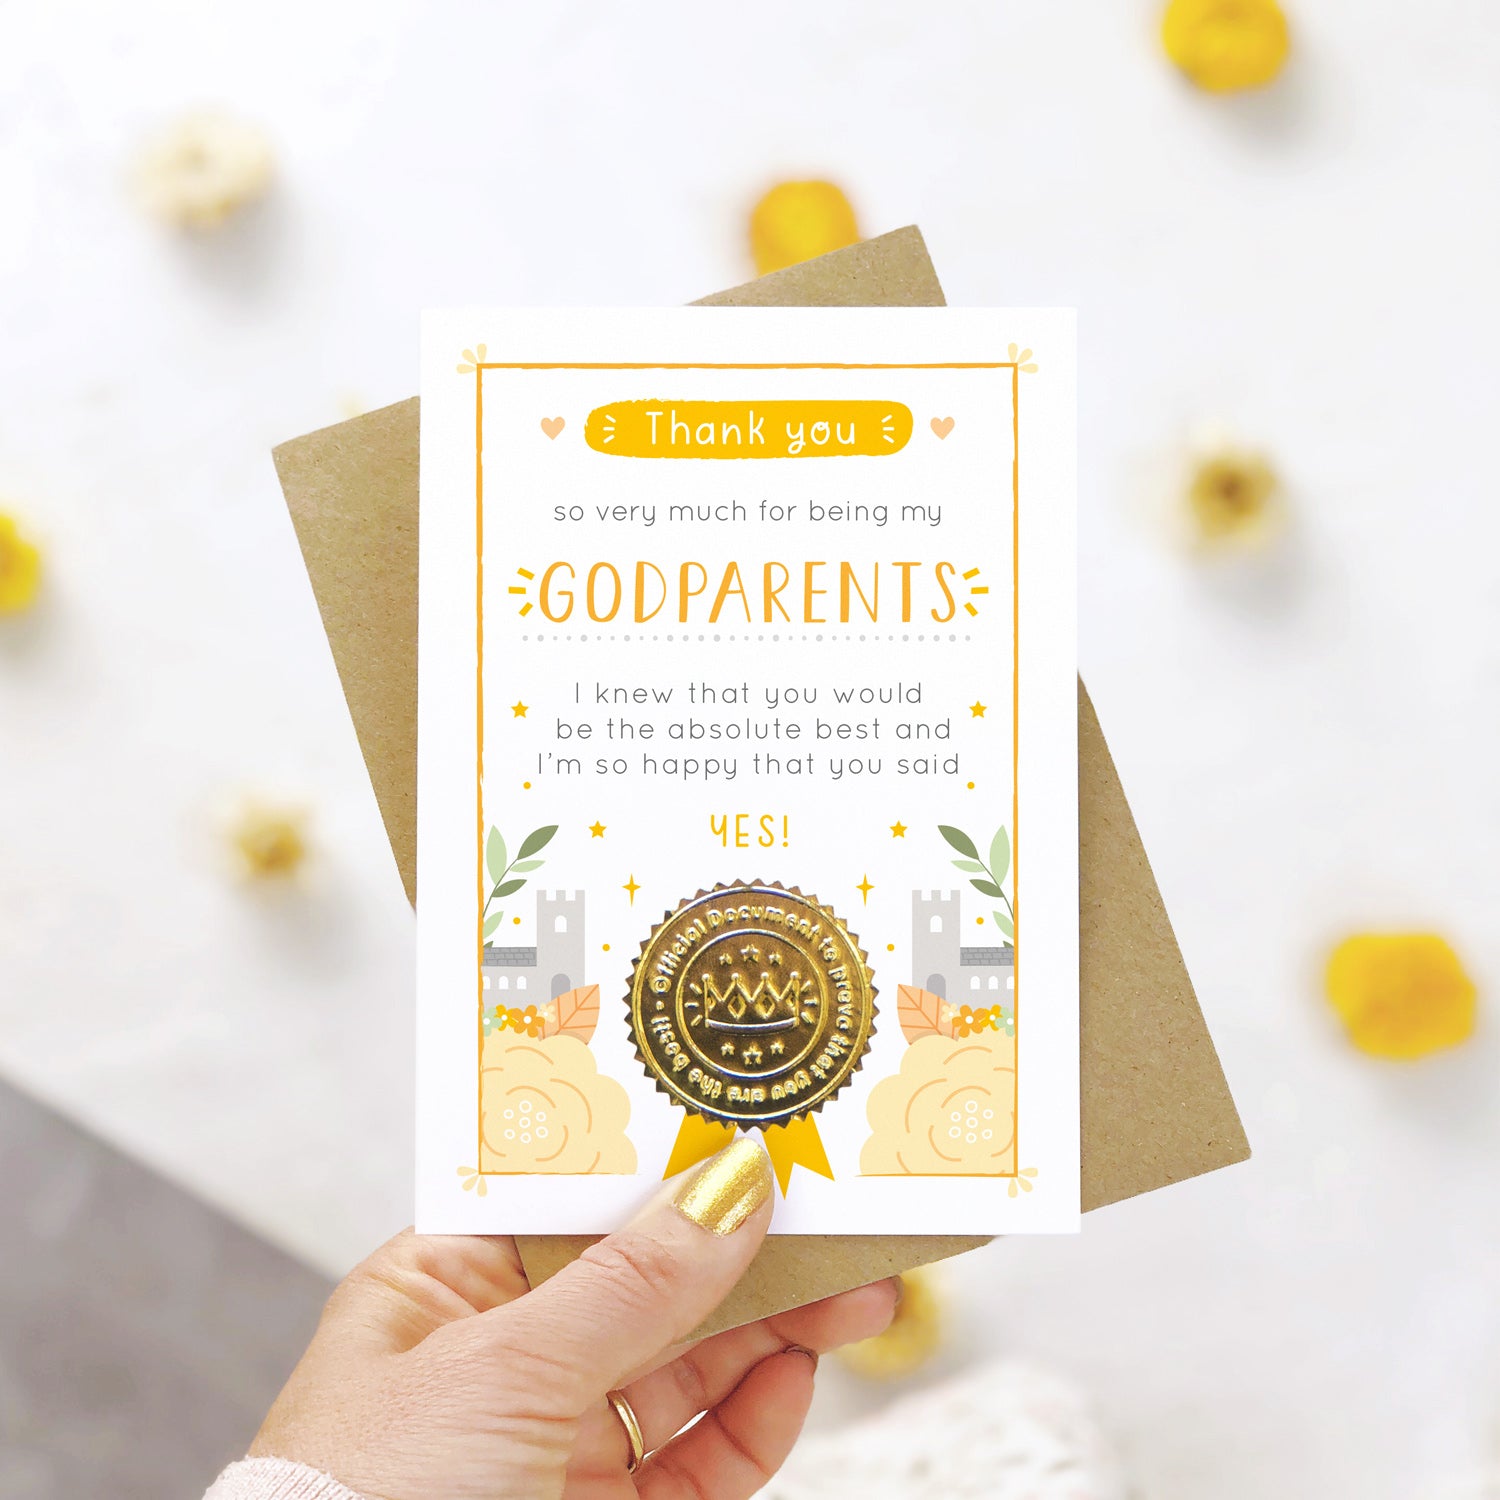 A ‘thank you for being my godparents’ certificate card with a shiny gold seal in the orange colour palette being held over a white background with yellow and natural flowers.